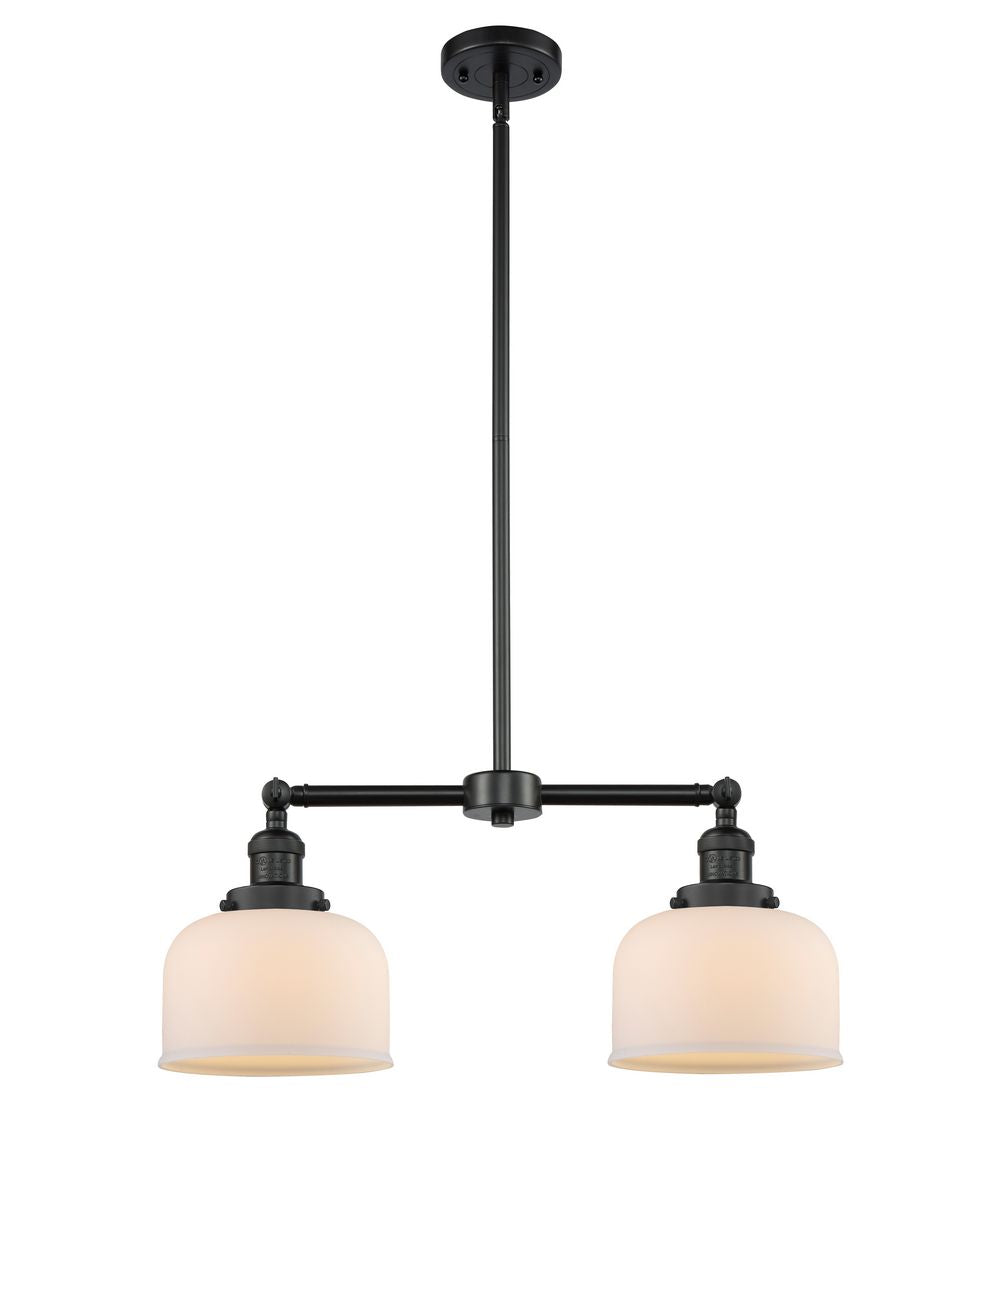 209-BK-G71 2-Light 21" Matte Black Island Light - Matte White Cased Large Bell Glass - LED Bulb - Dimmensions: 21 x 5 x 10<br>Minimum Height : 20.875<br>Maximum Height : 44.875 - Sloped Ceiling Compatible: Yes